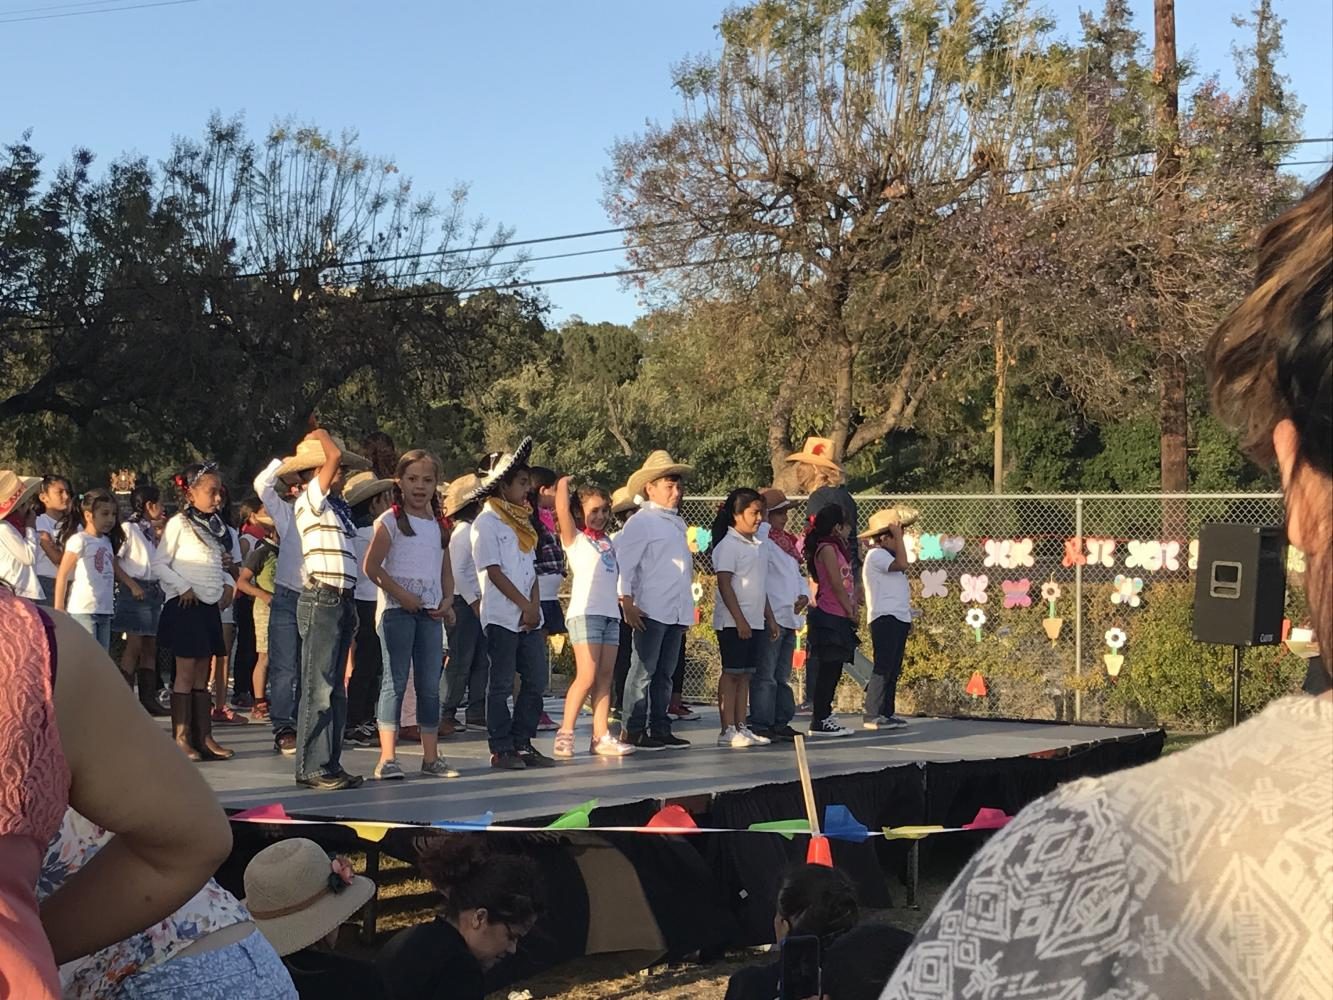 Students perform on stage during the Cerritos Spring Festival